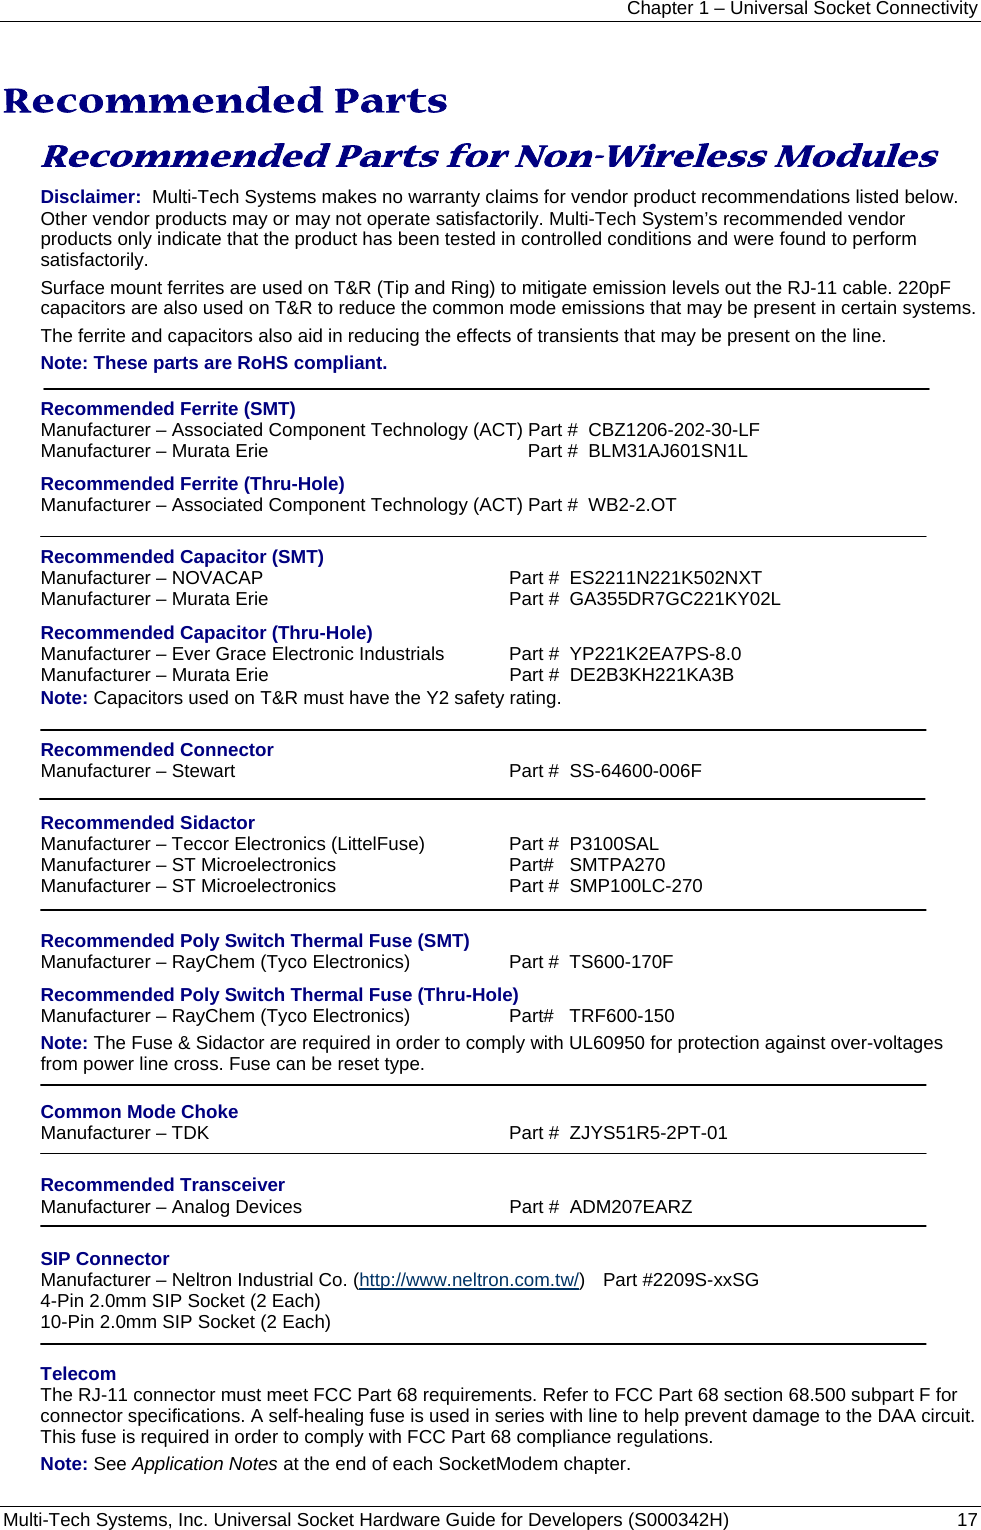 Chapter 1 – Universal Socket Connectivity Multi-Tech Systems, Inc. Universal Socket Hardware Guide for Developers (S000342H)  17   Recommended Parts  Recommended Parts for Non-Wireless Modules  Disclaimer:  Multi-Tech Systems makes no warranty claims for vendor product recommendations listed below. Other vendor products may or may not operate satisfactorily. Multi-Tech System’s recommended vendor products only indicate that the product has been tested in controlled conditions and were found to perform satisfactorily.  Surface mount ferrites are used on T&amp;R (Tip and Ring) to mitigate emission levels out the RJ-11 cable. 220pF capacitors are also used on T&amp;R to reduce the common mode emissions that may be present in certain systems.  The ferrite and capacitors also aid in reducing the effects of transients that may be present on the line. Note: These parts are RoHS compliant.  Recommended Ferrite (SMT) Manufacturer – Associated Component Technology (ACT) Part #  CBZ1206-202-30-LF Manufacturer – Murata Erie  Part #  BLM31AJ601SN1L Recommended Ferrite (Thru-Hole) Manufacturer – Associated Component Technology (ACT) Part #  WB2-2.OT  Recommended Capacitor (SMT) Manufacturer – NOVACAP  Part #  ES2211N221K502NXT Manufacturer – Murata Erie  Part #  GA355DR7GC221KY02L  Recommended Capacitor (Thru-Hole) Manufacturer – Ever Grace Electronic Industrials  Part #  YP221K2EA7PS-8.0 Manufacturer – Murata Erie  Part #  DE2B3KH221KA3B Note: Capacitors used on T&amp;R must have the Y2 safety rating.  Recommended Connector Manufacturer – Stewart  Part #  SS-64600-006F  Recommended Sidactor Manufacturer – Teccor Electronics (LittelFuse)  Part #  P3100SAL Manufacturer – ST Microelectronics   Part#   SMTPA270  Manufacturer – ST Microelectronics  Part #  SMP100LC-270  Recommended Poly Switch Thermal Fuse (SMT) Manufacturer – RayChem (Tyco Electronics)  Part #  TS600-170F Recommended Poly Switch Thermal Fuse (Thru-Hole) Manufacturer – RayChem (Tyco Electronics)  Part#   TRF600-150 Note: The Fuse &amp; Sidactor are required in order to comply with UL60950 for protection against over-voltages  from power line cross. Fuse can be reset type.  Common Mode Choke Manufacturer – TDK    Part #  ZJYS51R5-2PT-01  Recommended Transceiver Manufacturer – Analog Devices    Part #  ADM207EARZ  SIP Connector Manufacturer – Neltron Industrial Co. (http://www.neltron.com.tw/) Part #2209S-xxSG 4-Pin 2.0mm SIP Socket (2 Each) 10-Pin 2.0mm SIP Socket (2 Each)  Telecom The RJ-11 connector must meet FCC Part 68 requirements. Refer to FCC Part 68 section 68.500 subpart F for connector specifications. A self-healing fuse is used in series with line to help prevent damage to the DAA circuit. This fuse is required in order to comply with FCC Part 68 compliance regulations. Note: See Application Notes at the end of each SocketModem chapter. 